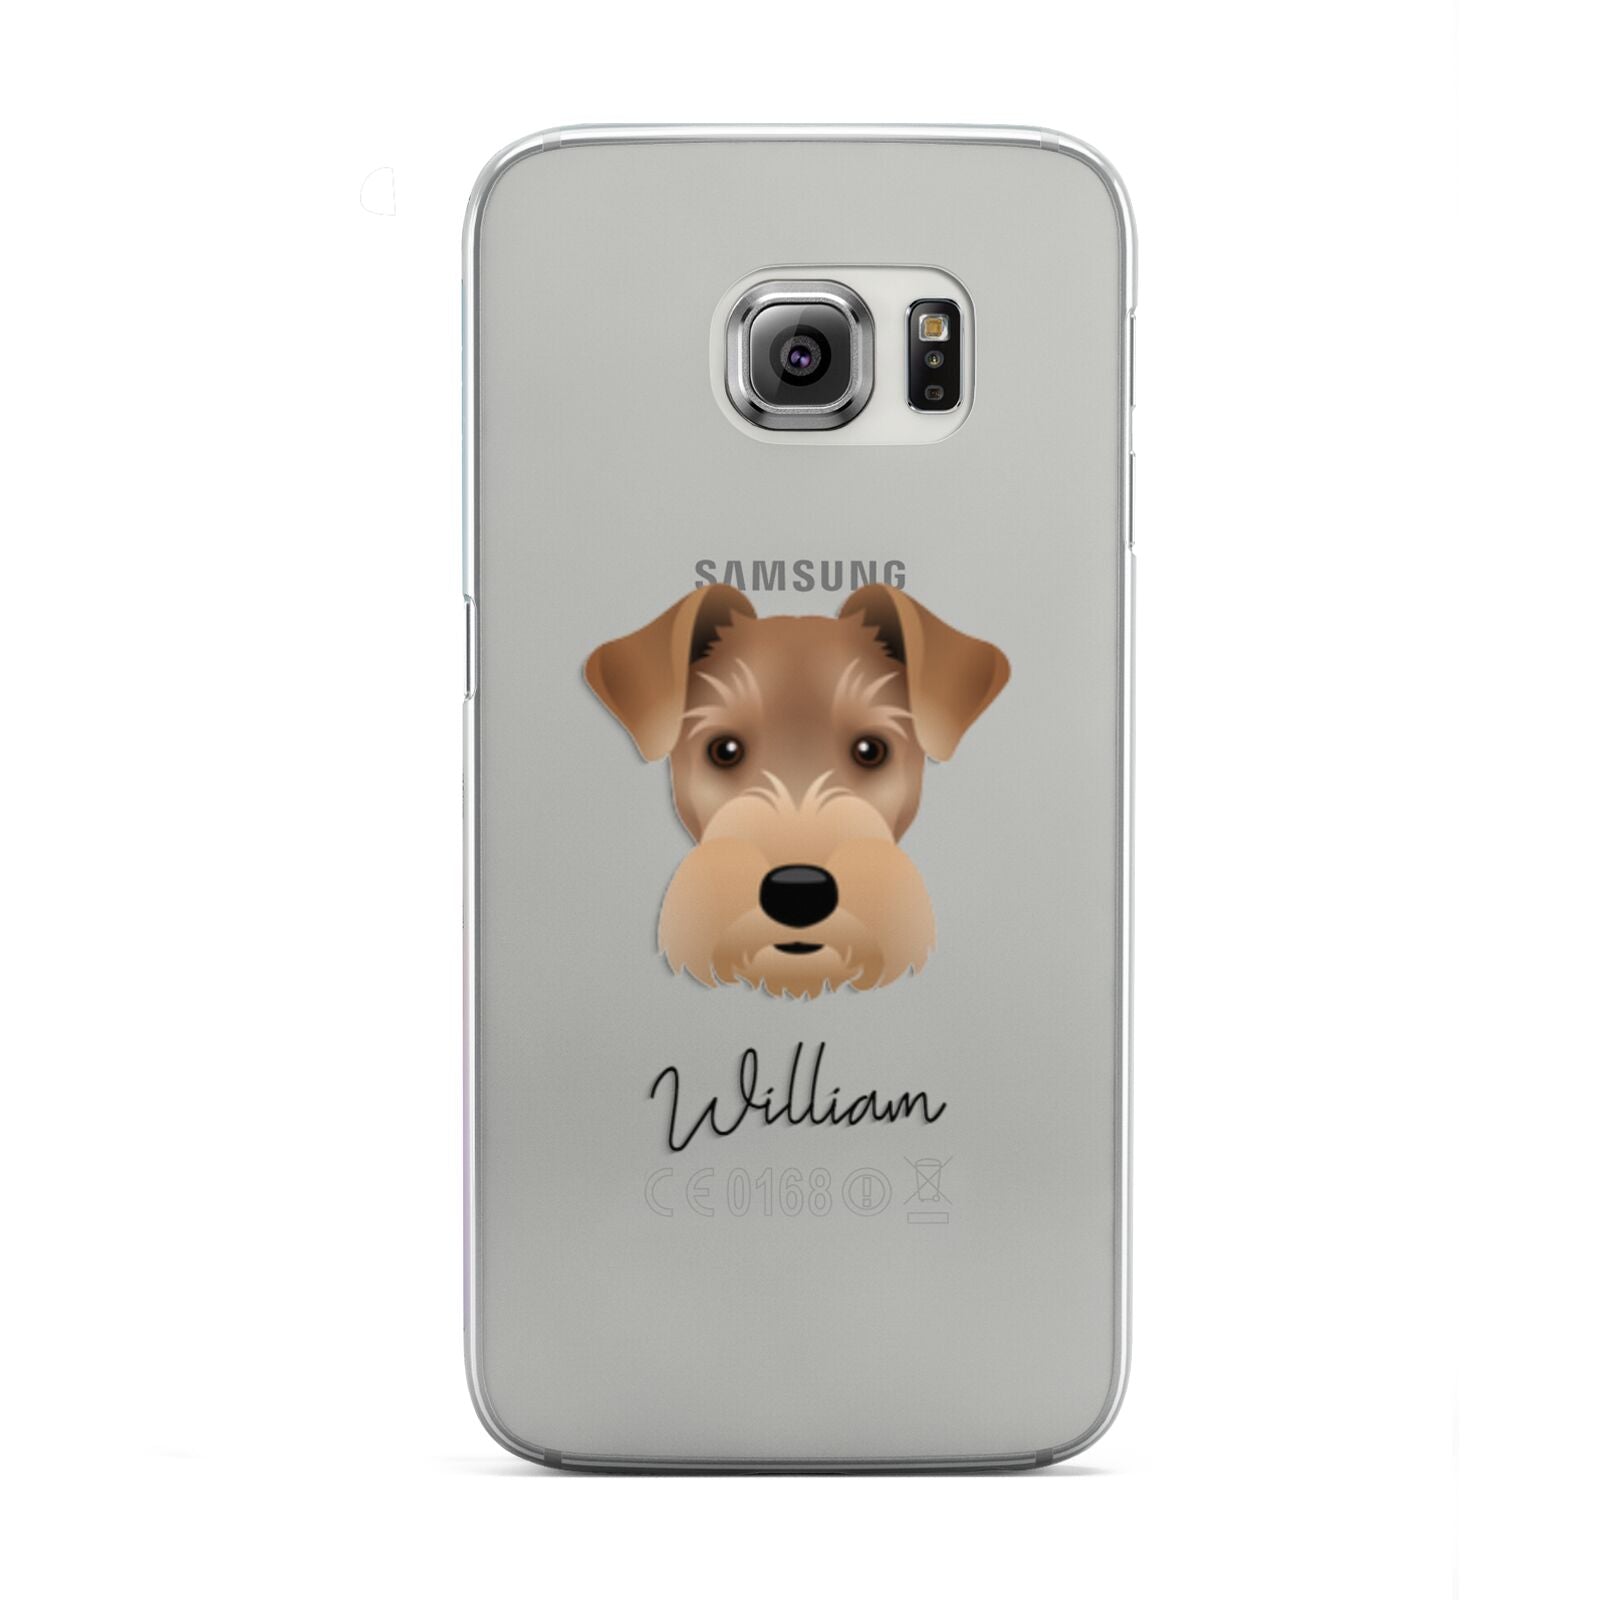 Welsh Terrier Personalised Samsung Galaxy S6 Edge Case